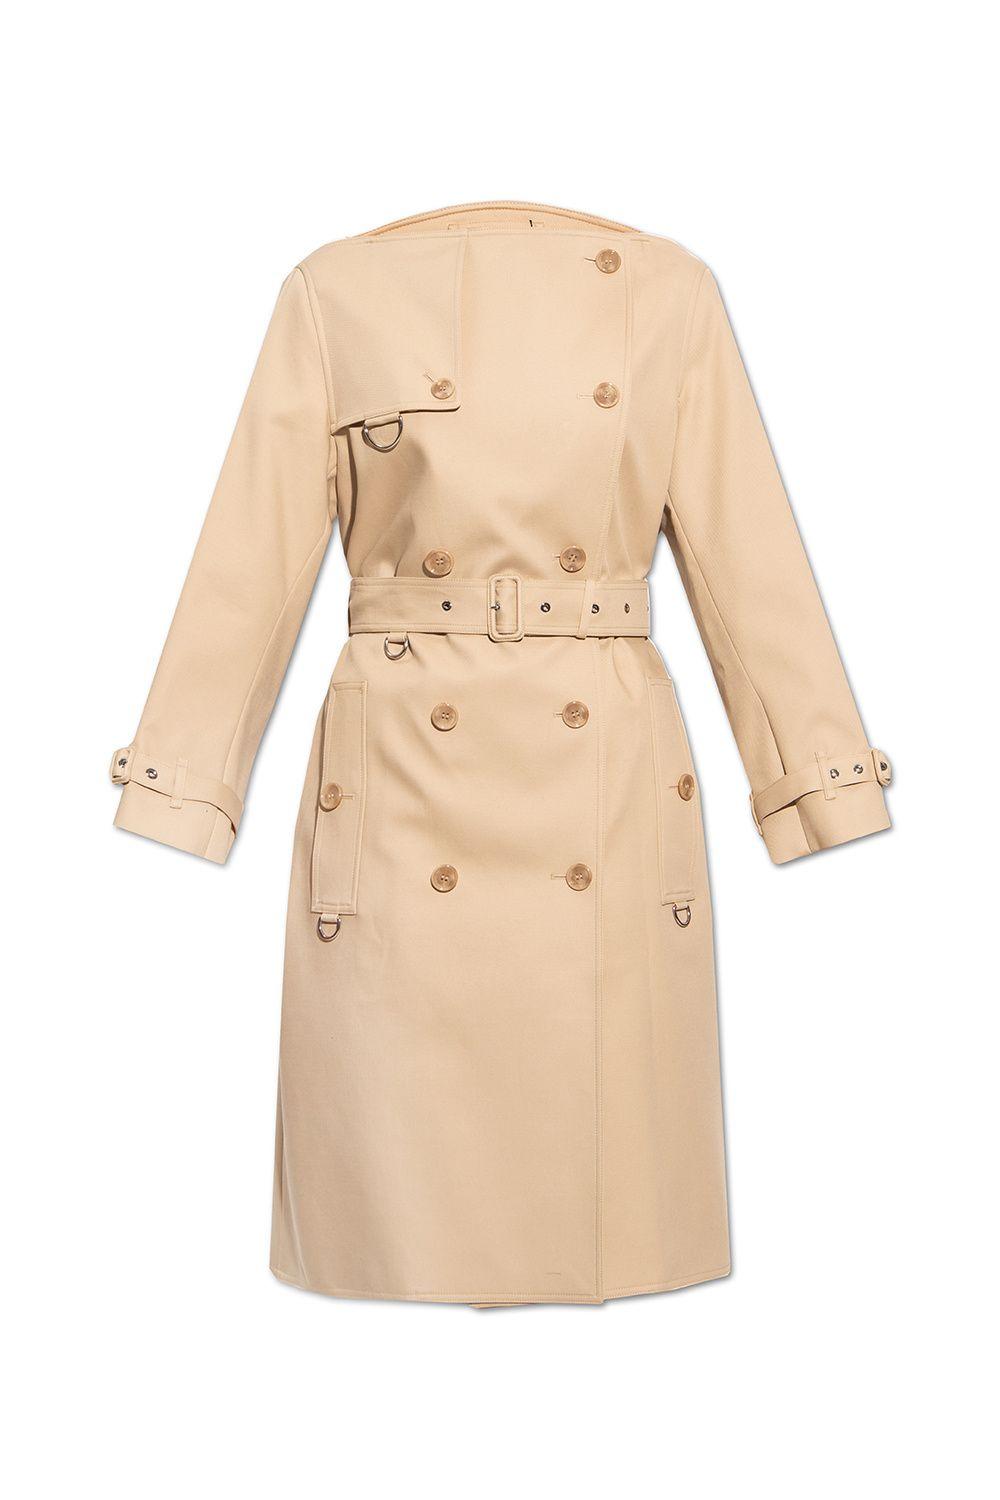 Burberry Boat Neck Trench Coat in Natural | Lyst